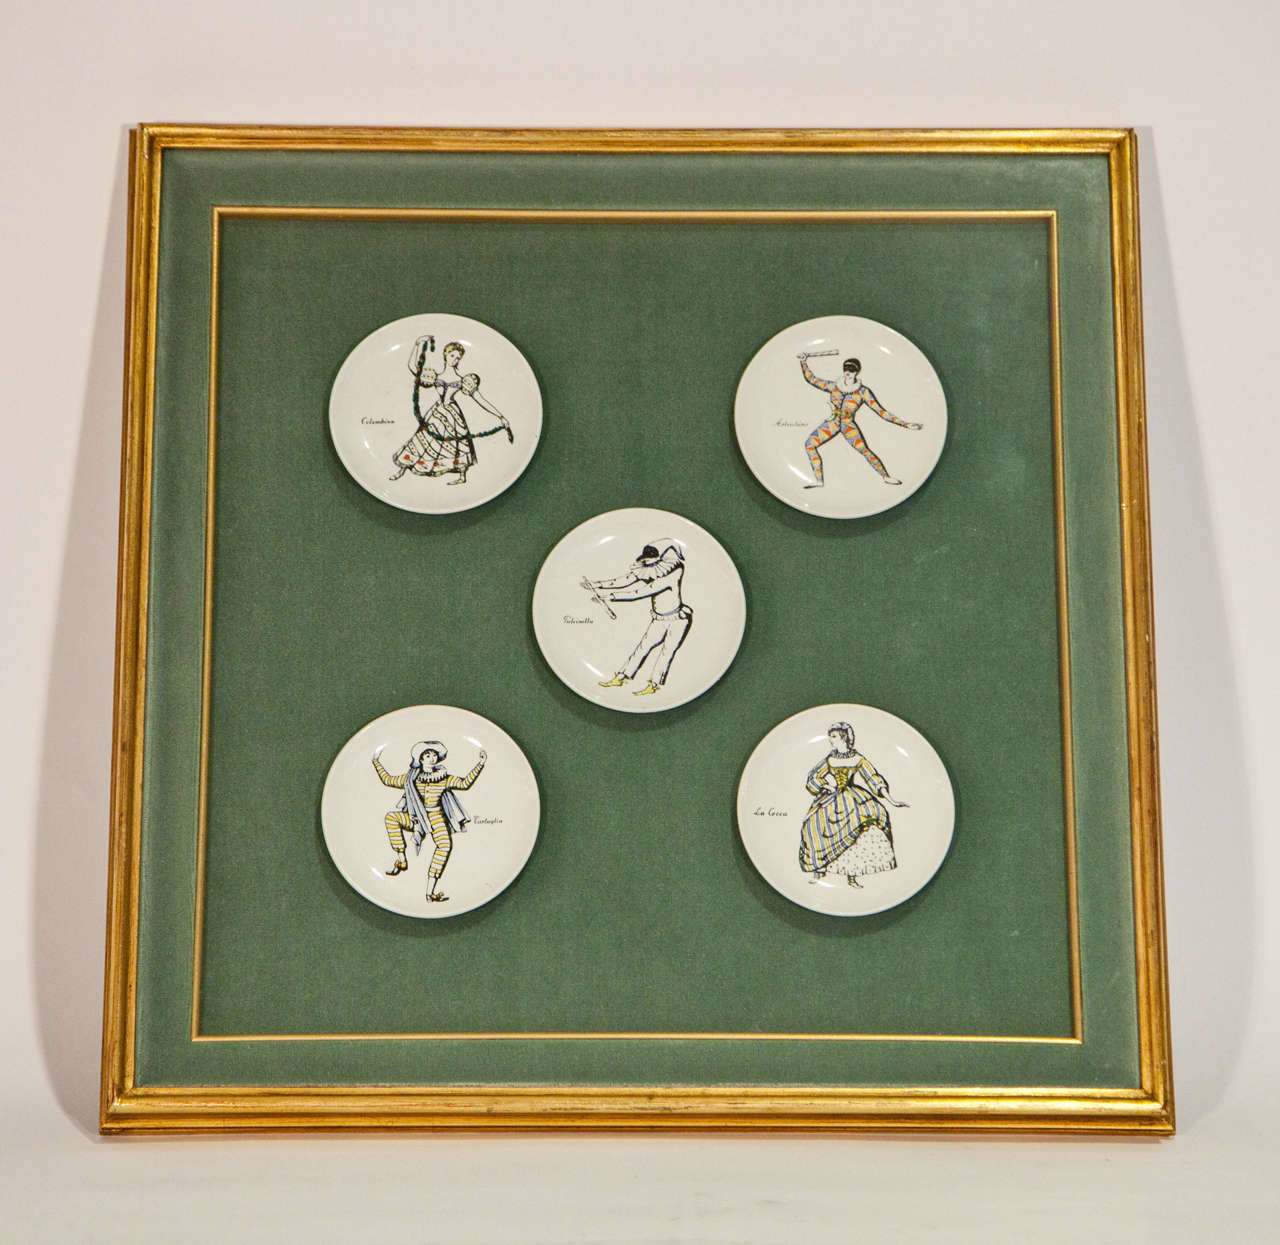 18th century engravings of Commedia dell'Arte actors hand-painted on porcelain plates, framed together in an eau-de-Nile velvet shadowbox with a giltwood frame. The plates are from the series 